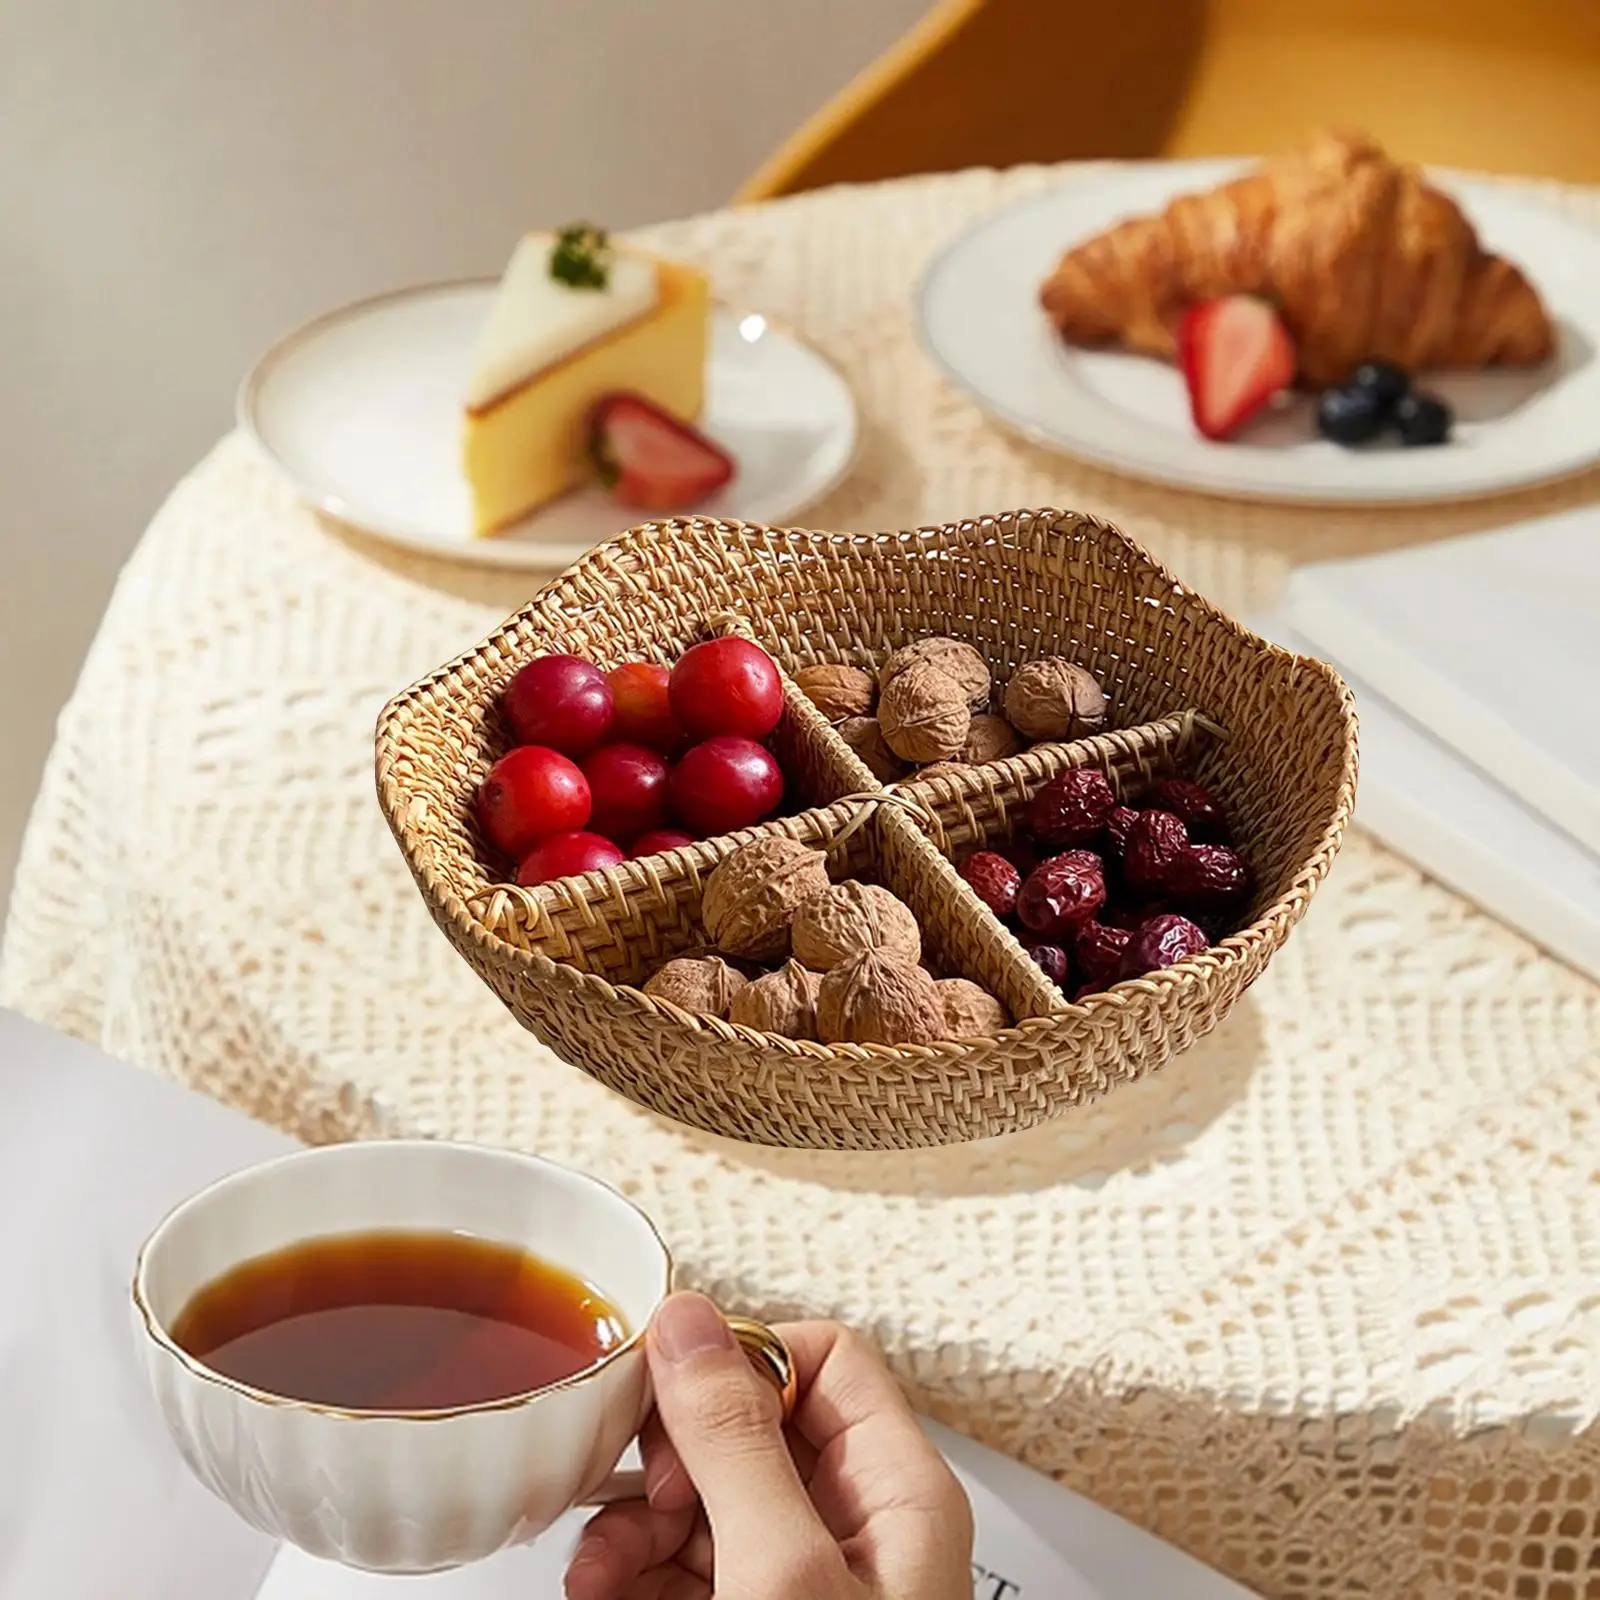 Rattan Storage Basket Divisional Stackable Portable Serving Tray Woven Bread Basket for Restaurant Home Breakfast Centerpiece